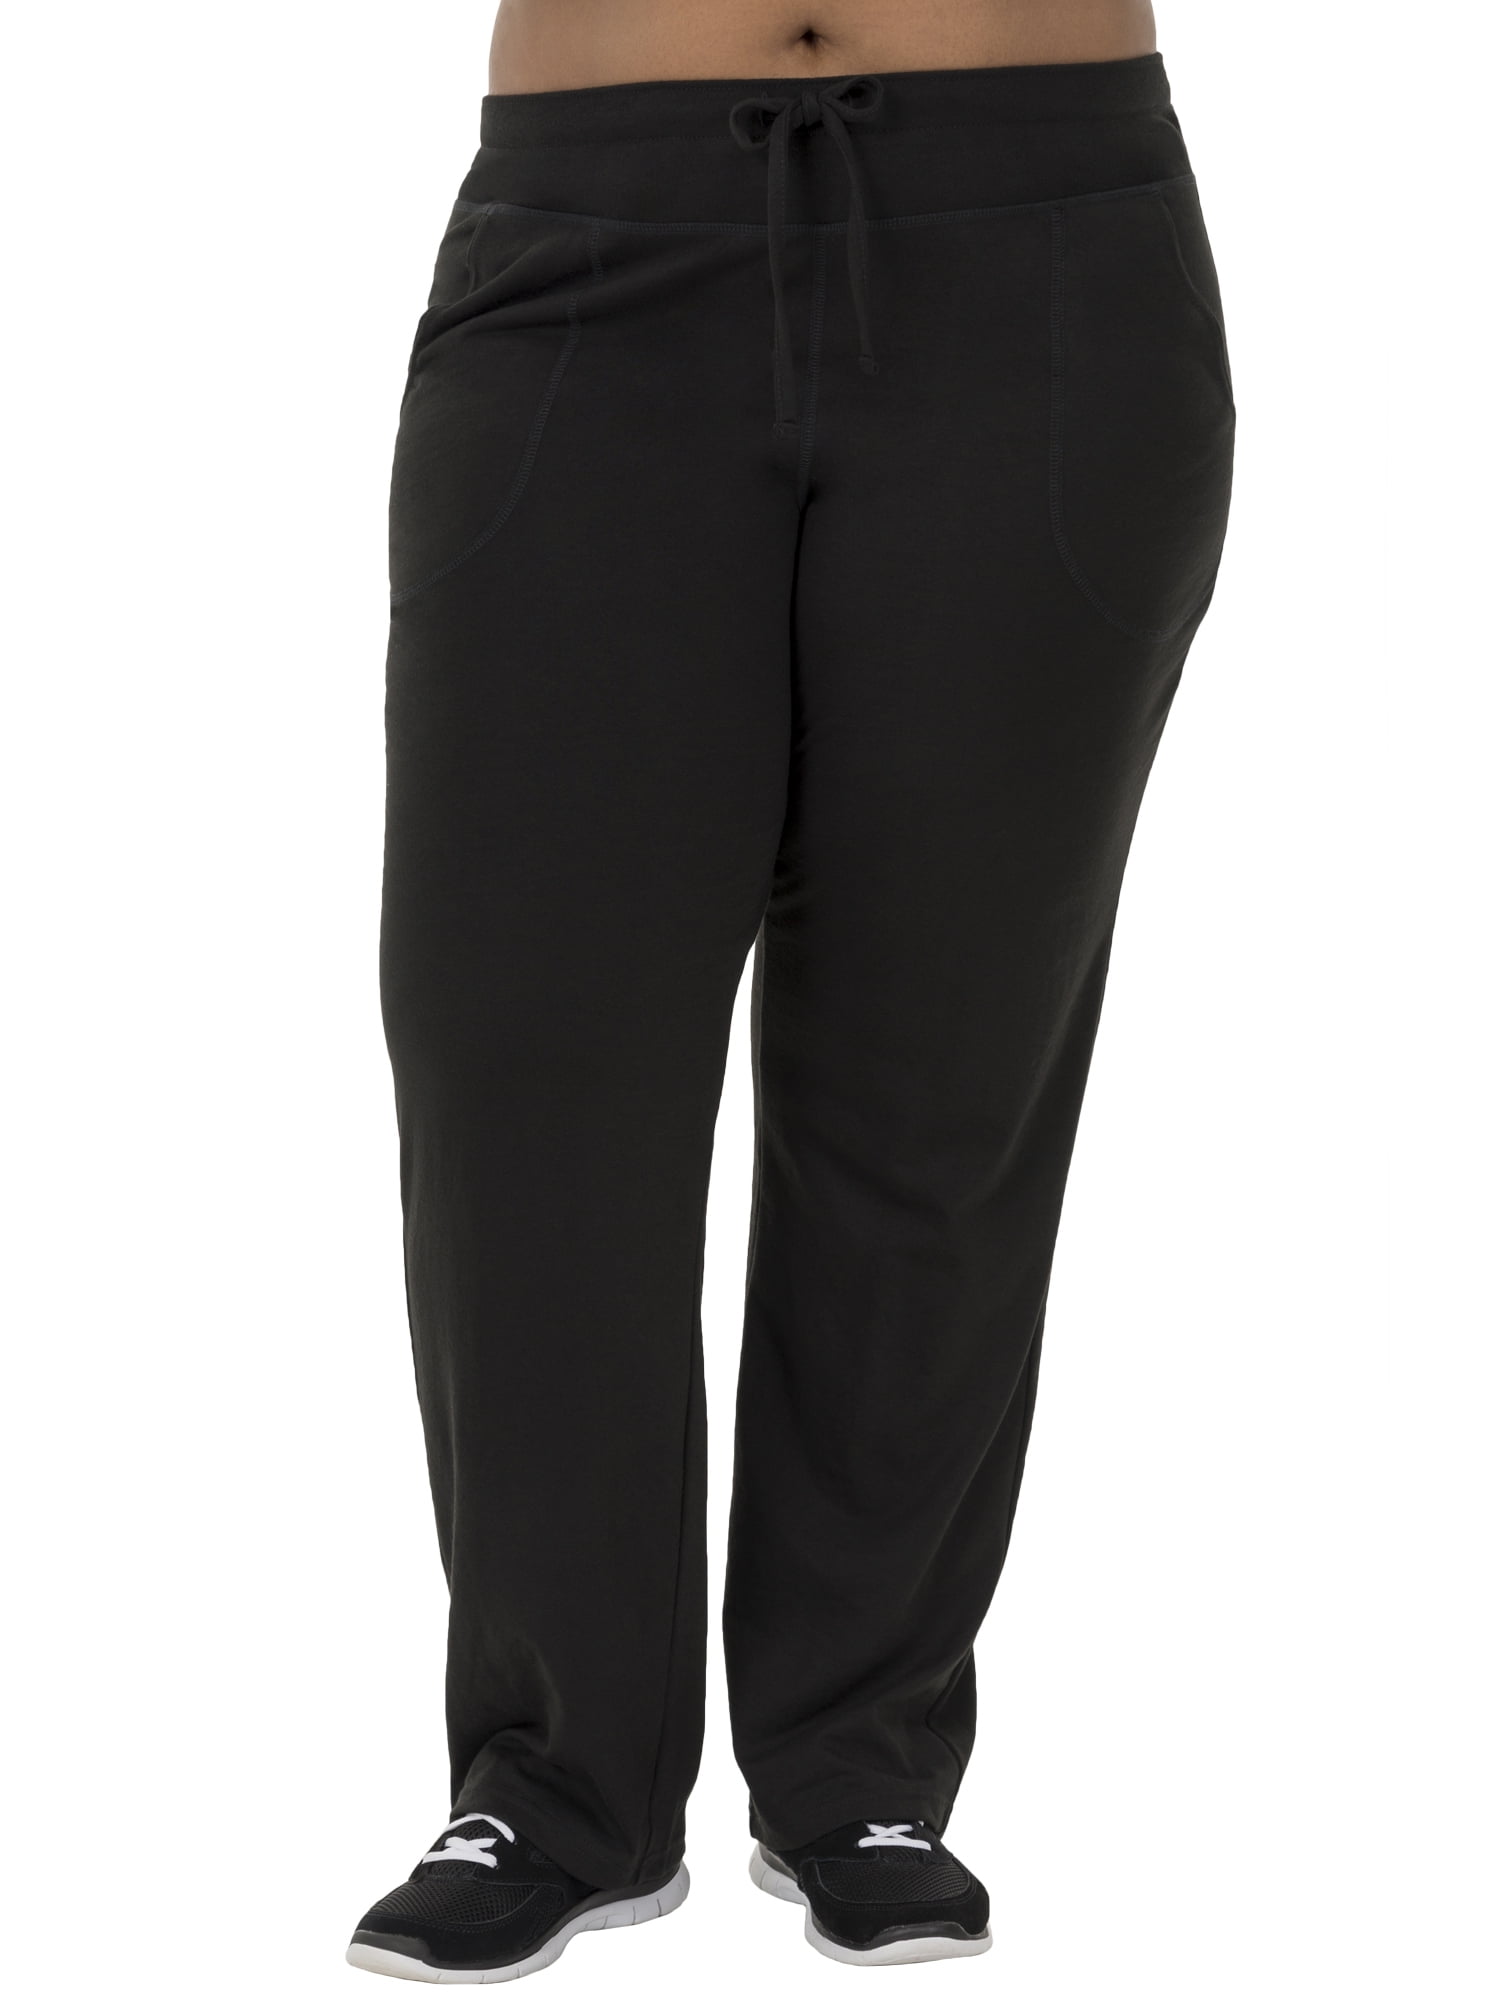 Fit for Me by Fruit of the Loom Women's Plus-Size Lounge Pant - Walmart.com